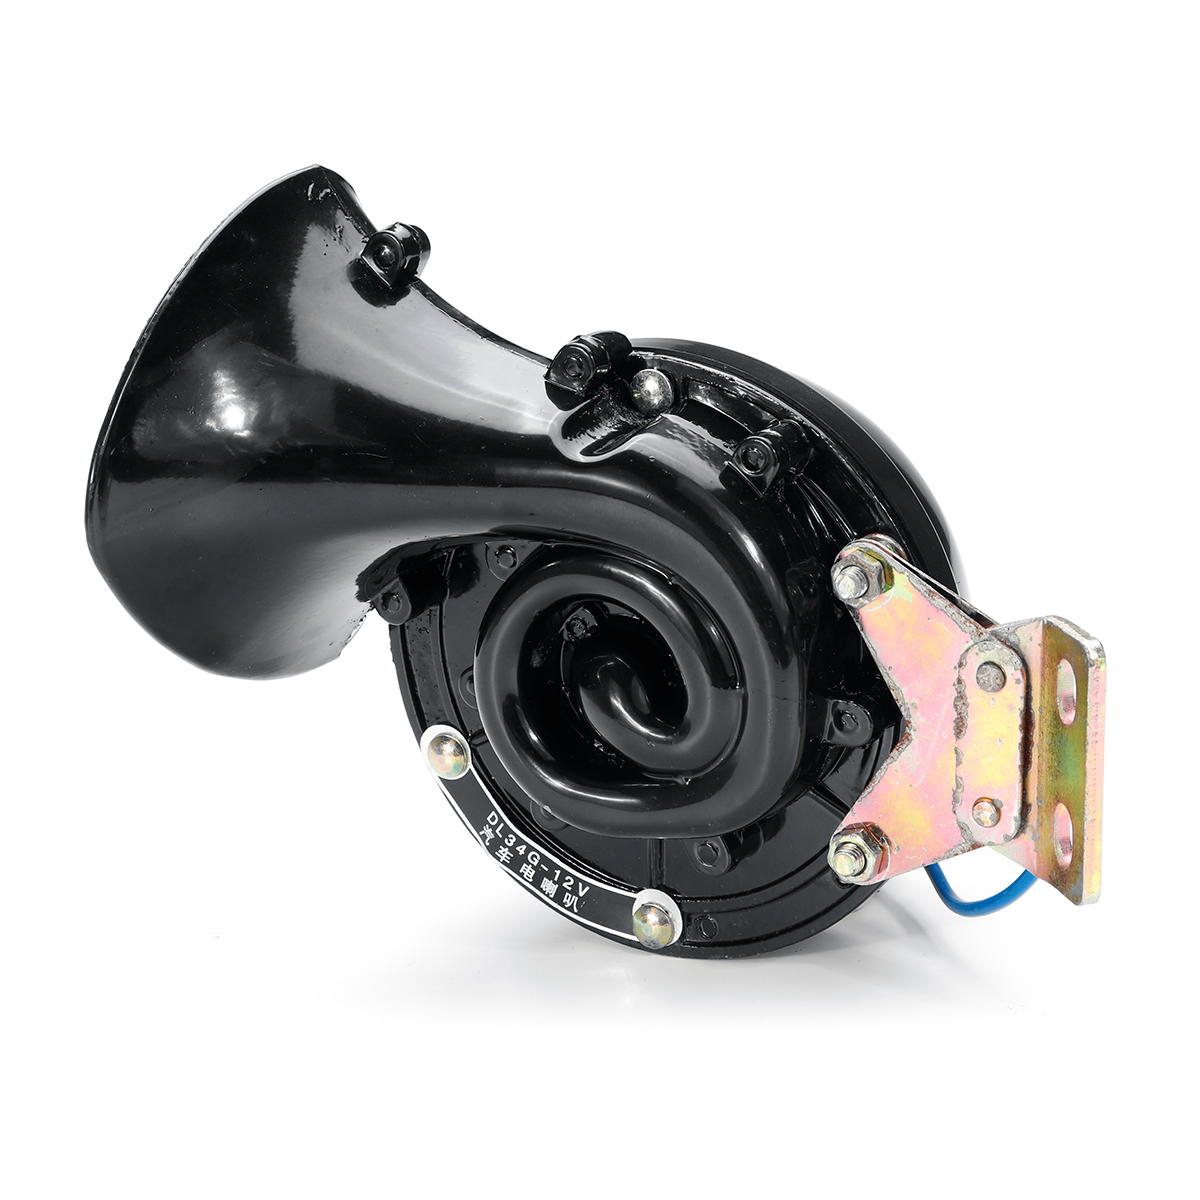 12V 250Db Electric Bull Horn Waterproof Super Loud Raging Sound Universal for Car Motorcycle - Auto GoShop